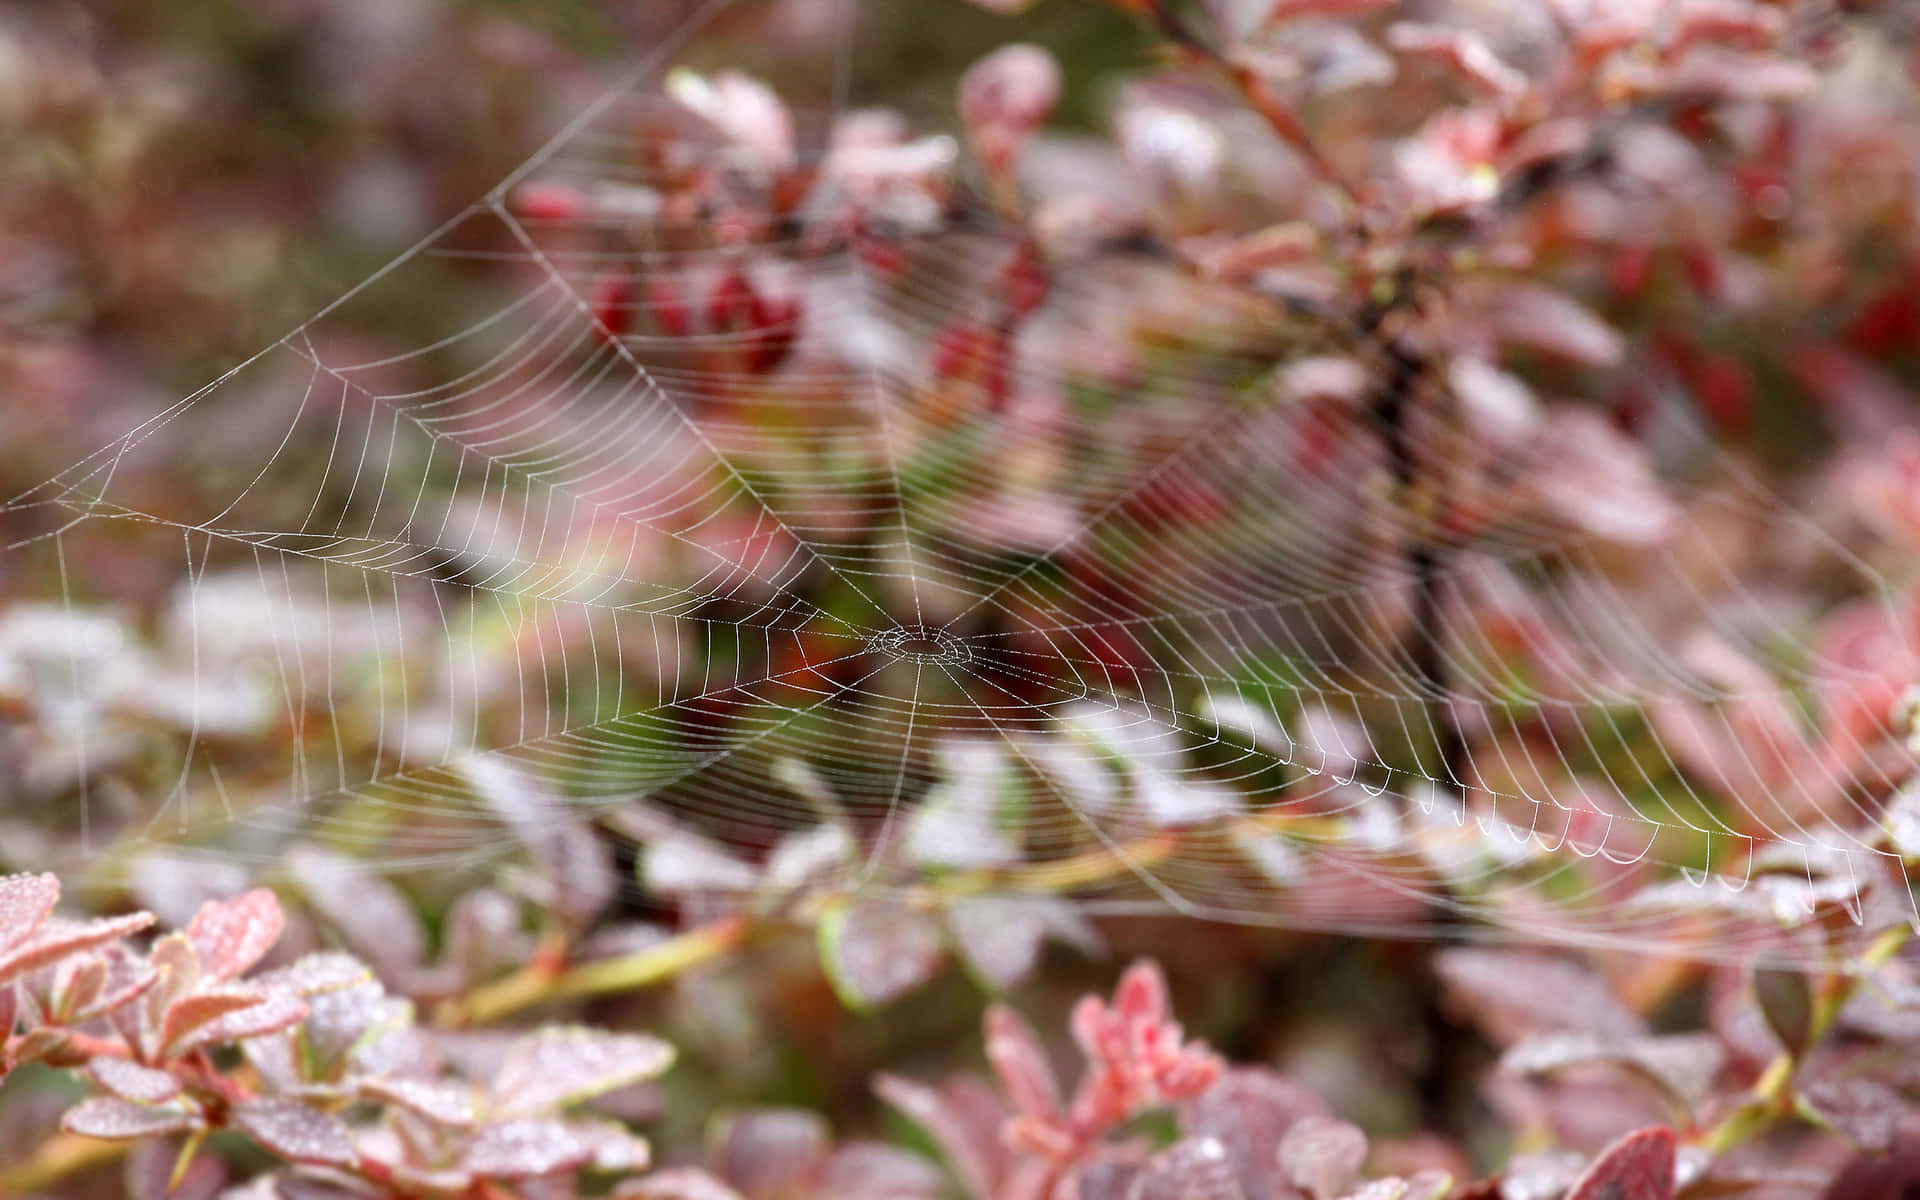 Spider Web Dew Frosted Plants.jpg Wallpaper